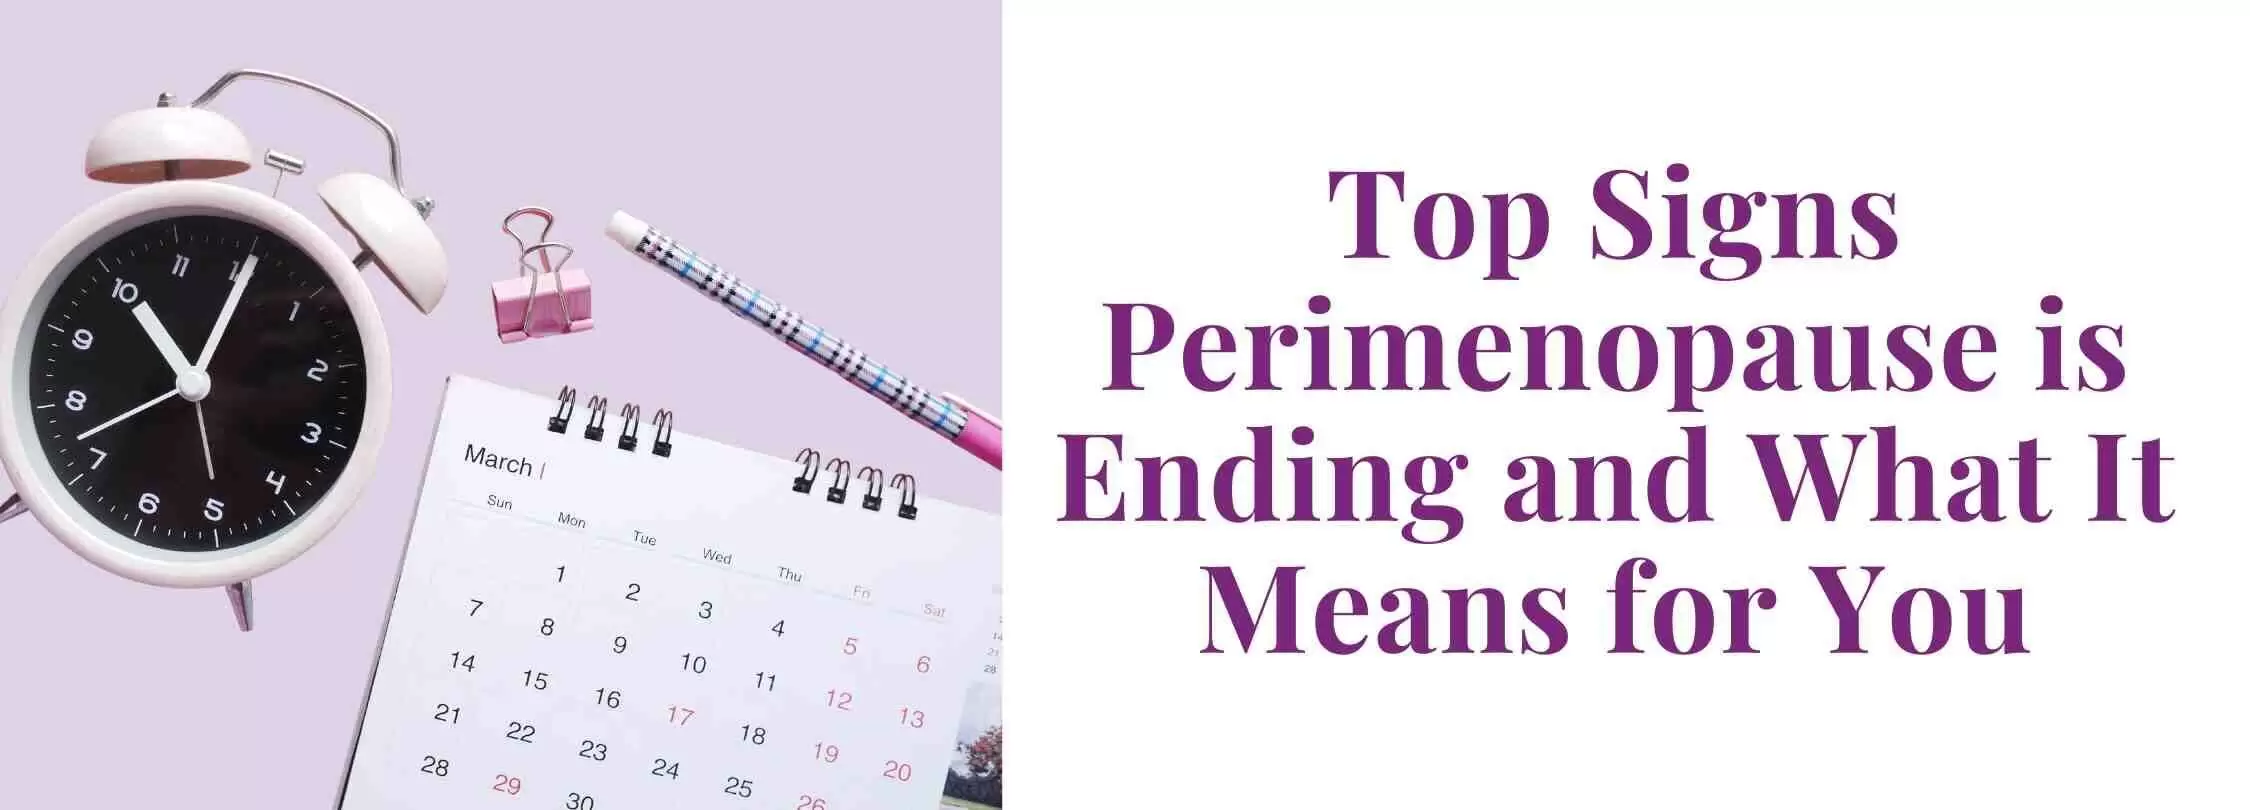 Top Signs Perimenopause Is Ending and What It Means for You